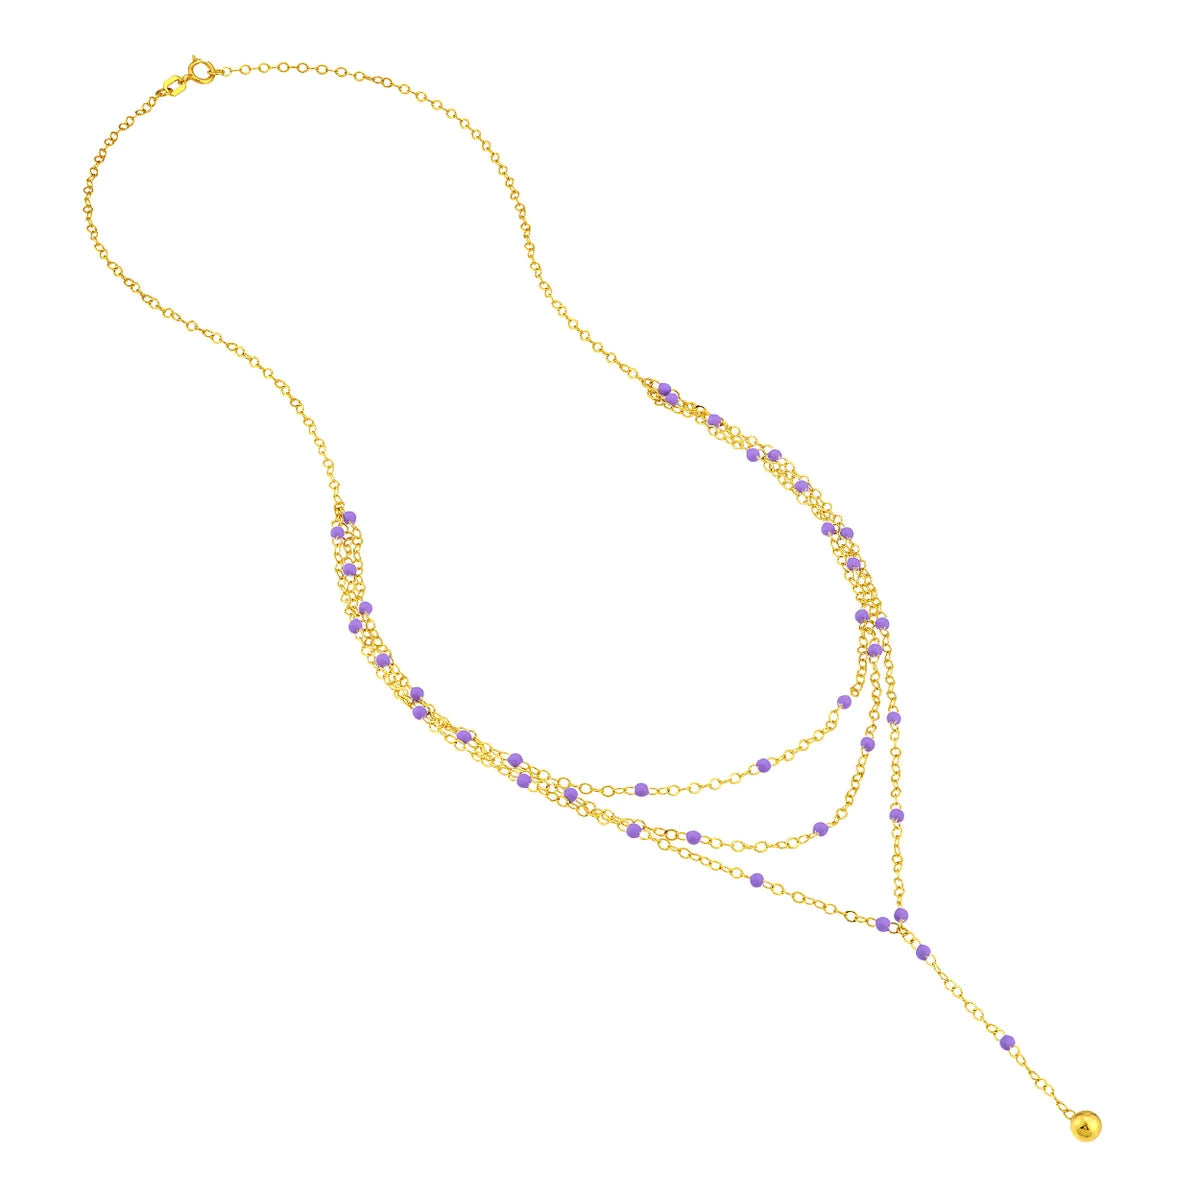 14K GOLD LAVENDER WITH ENAMEL BEADS